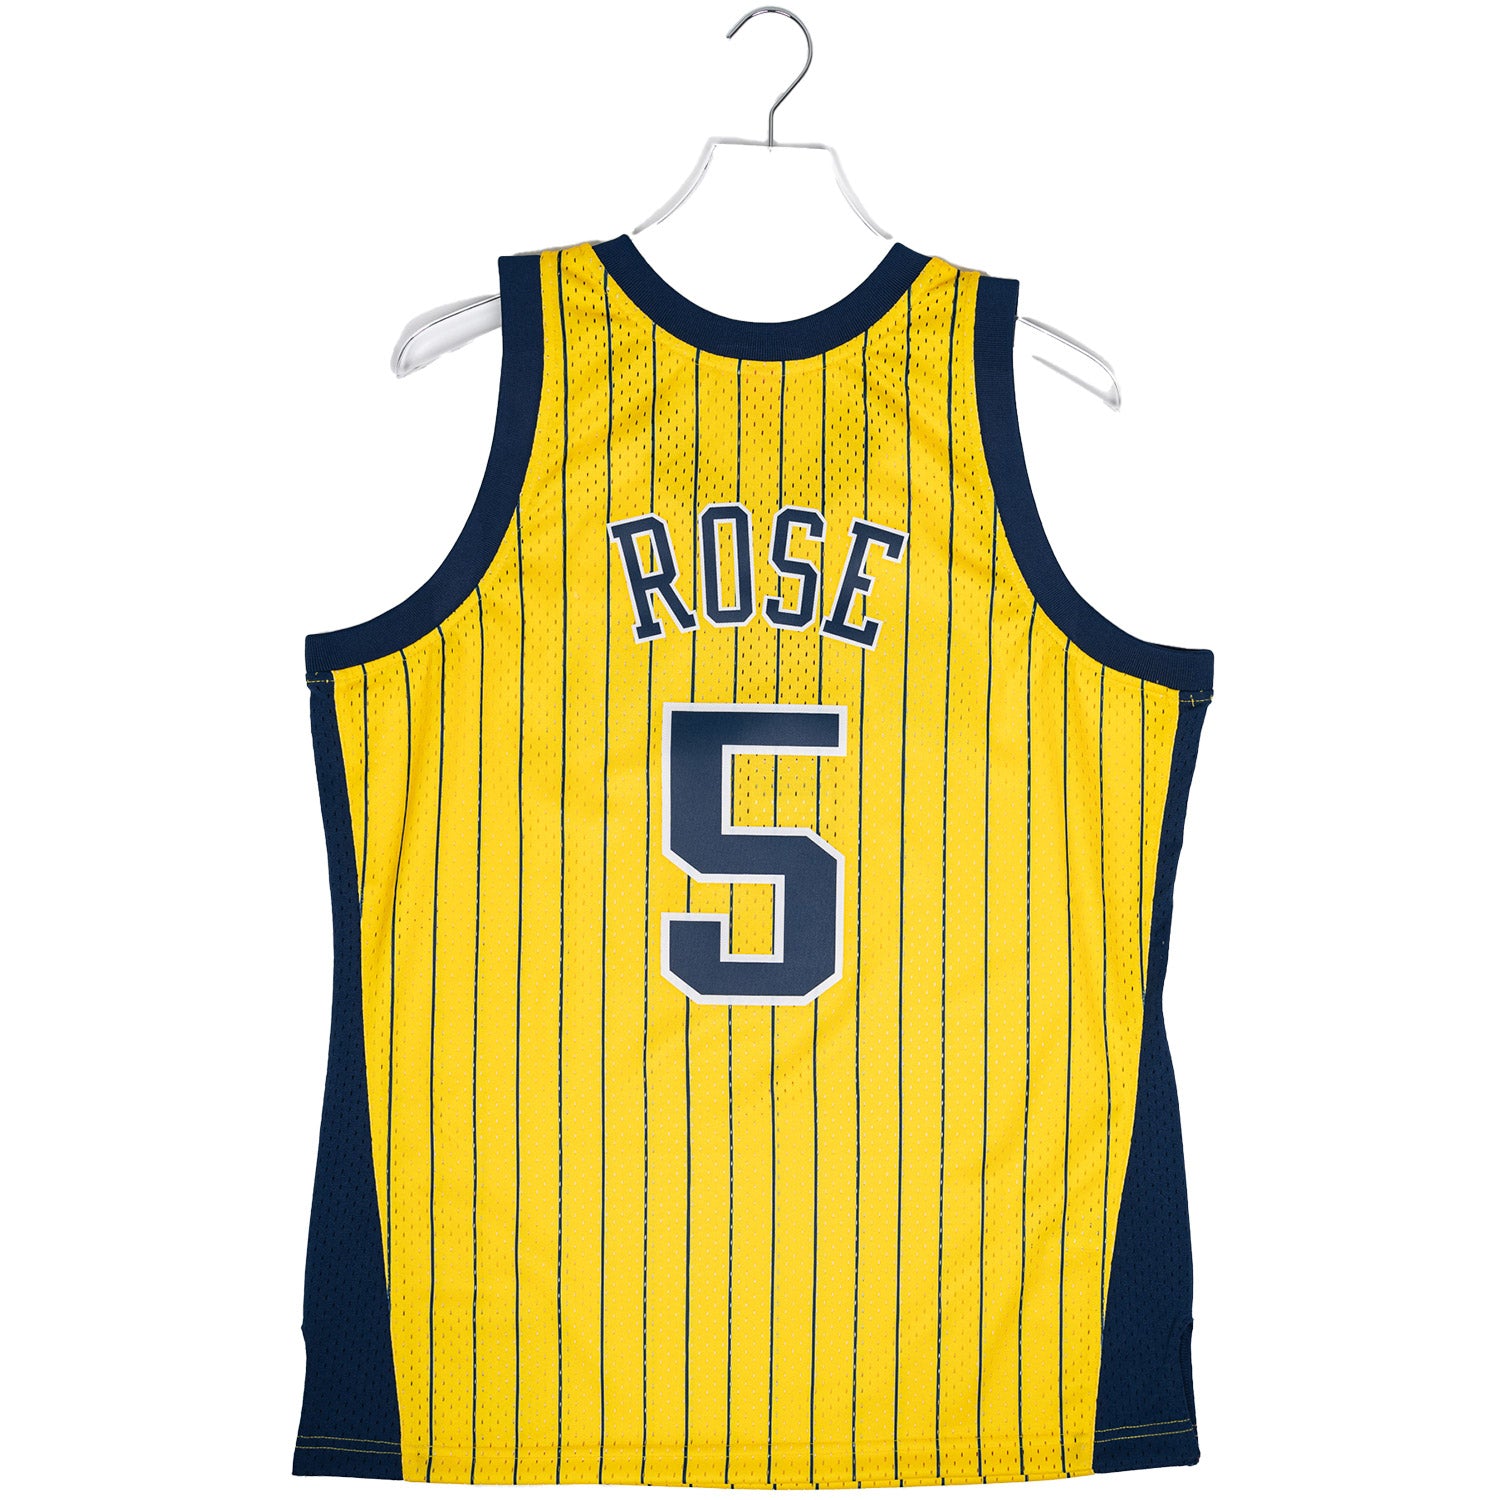 Jalen Rose Jersey - NBA Indiana Pacers Jalen Rose Jerseys - Pacers Store